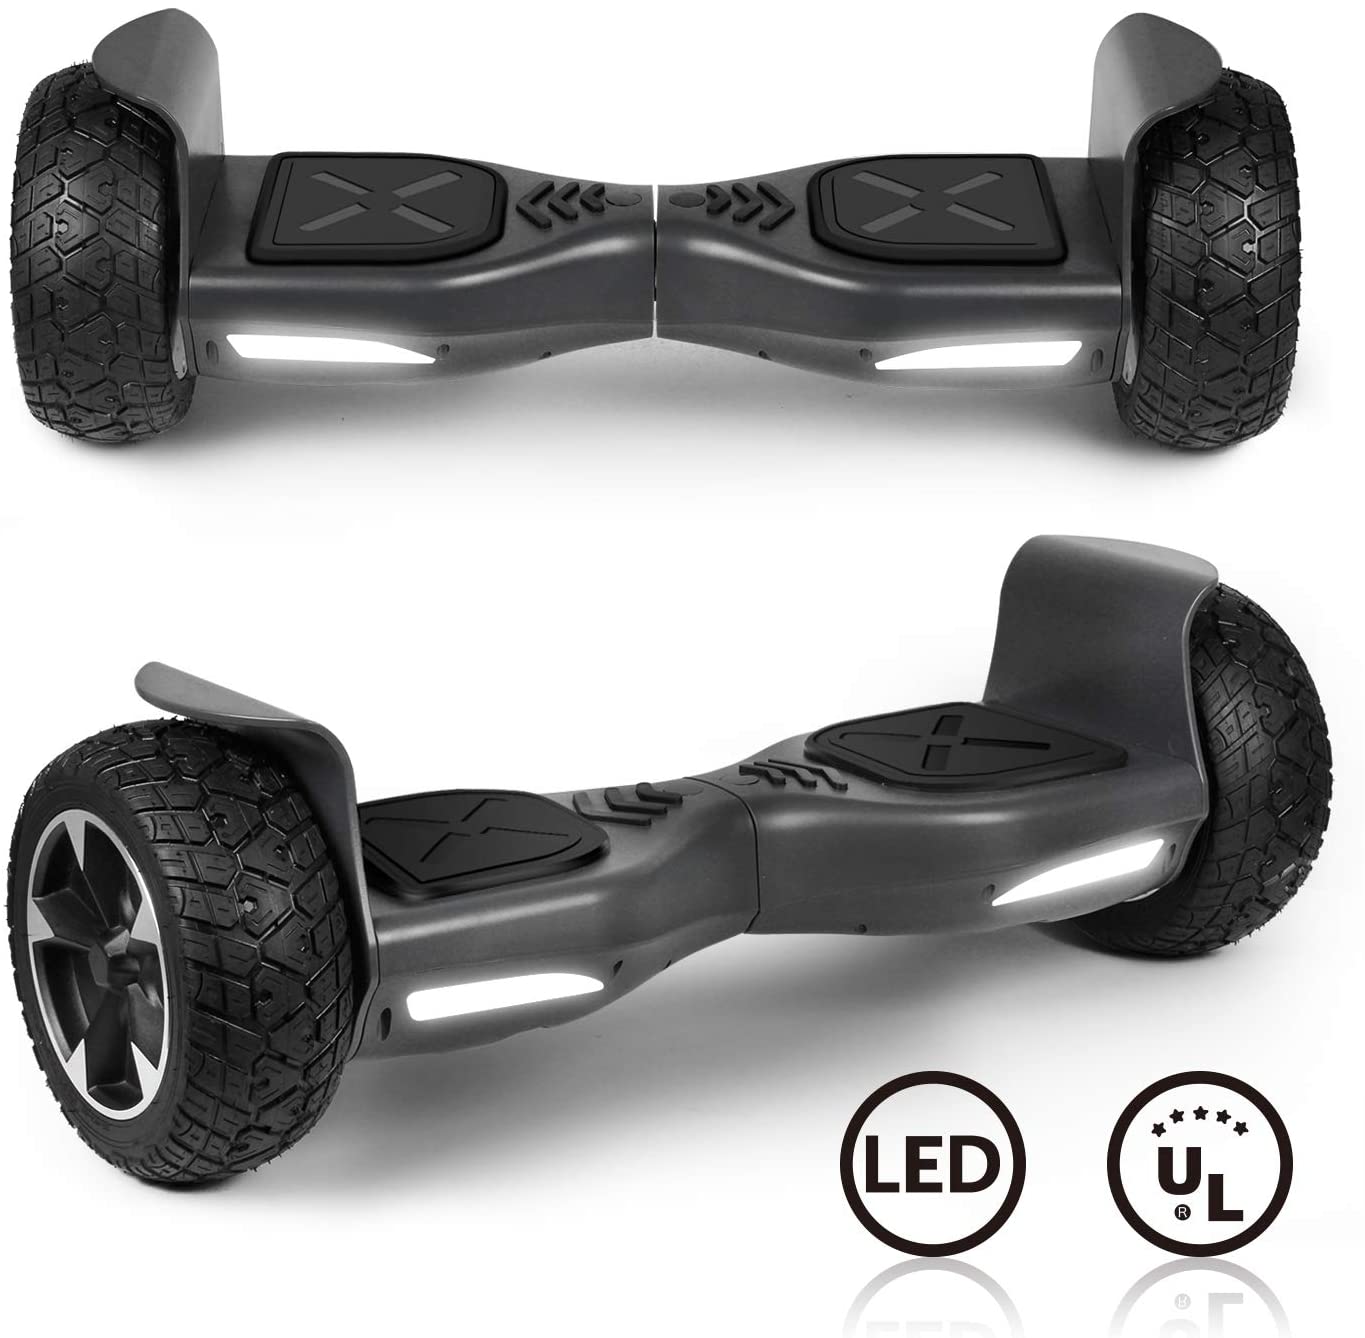 11 Best Hoverboard For Kids (2022 Reviews & Buying Guide) 7